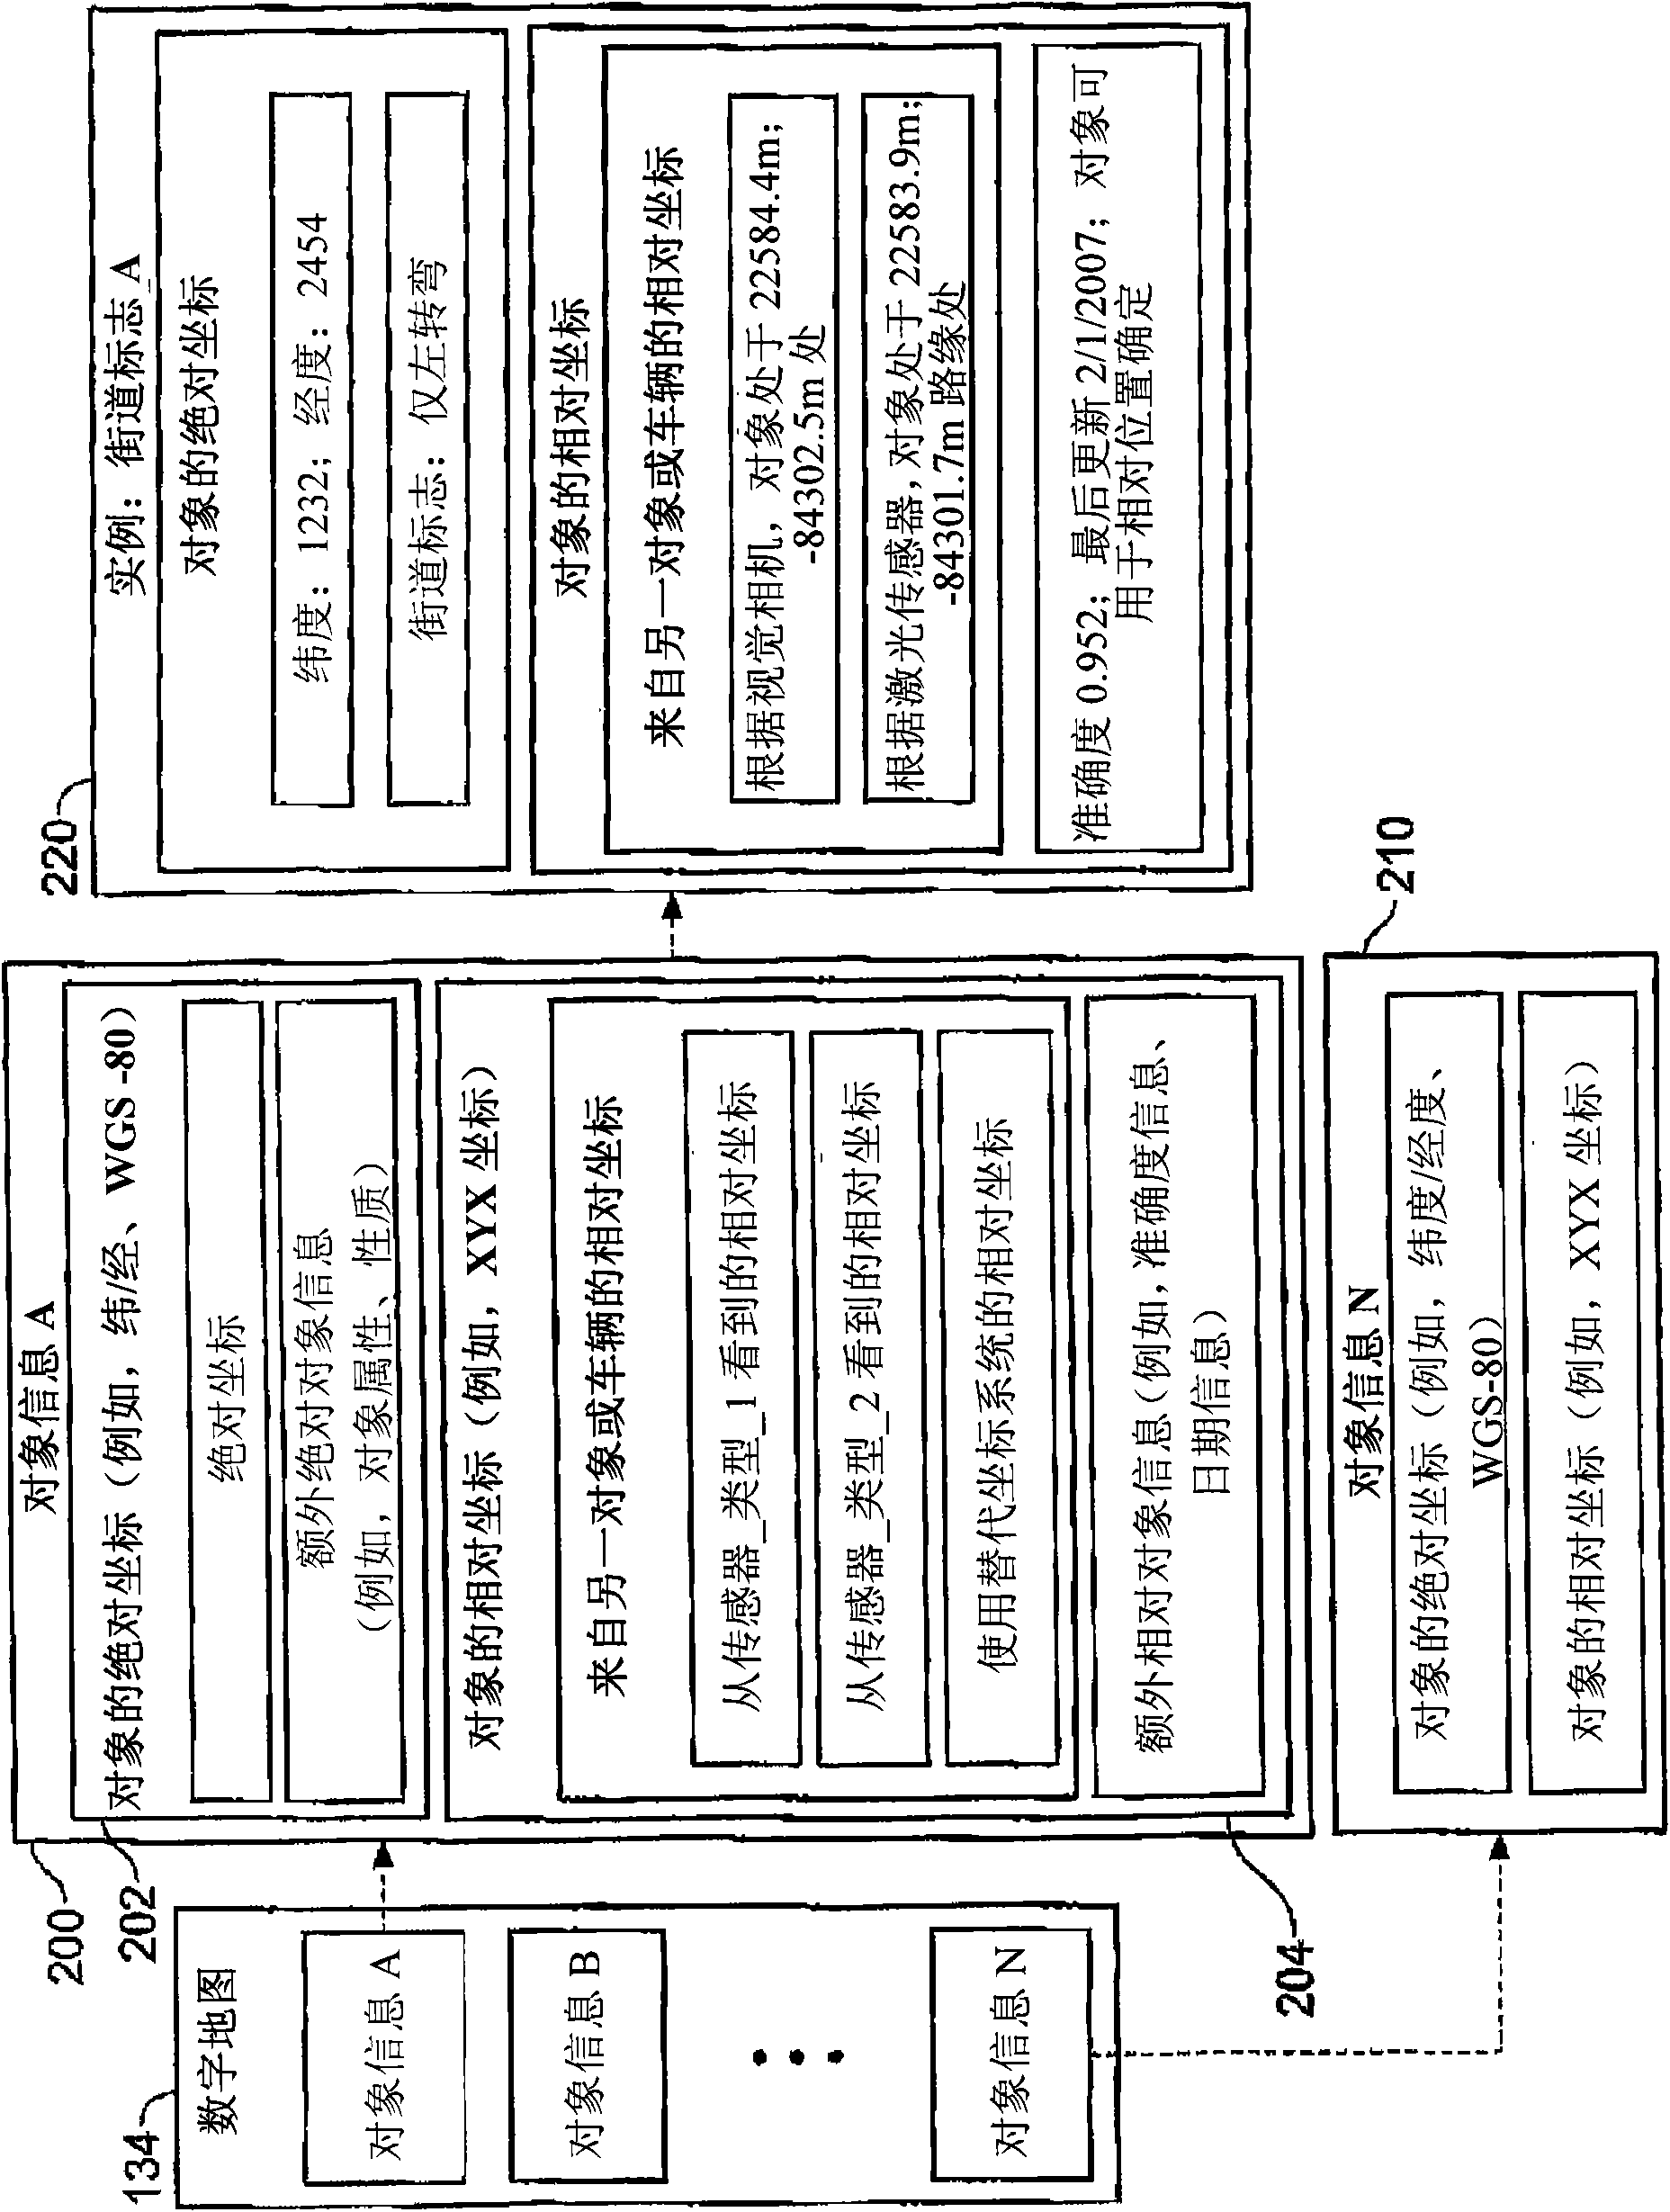 System and method for vehicle navigation and piloting including absolute and relative coordinates